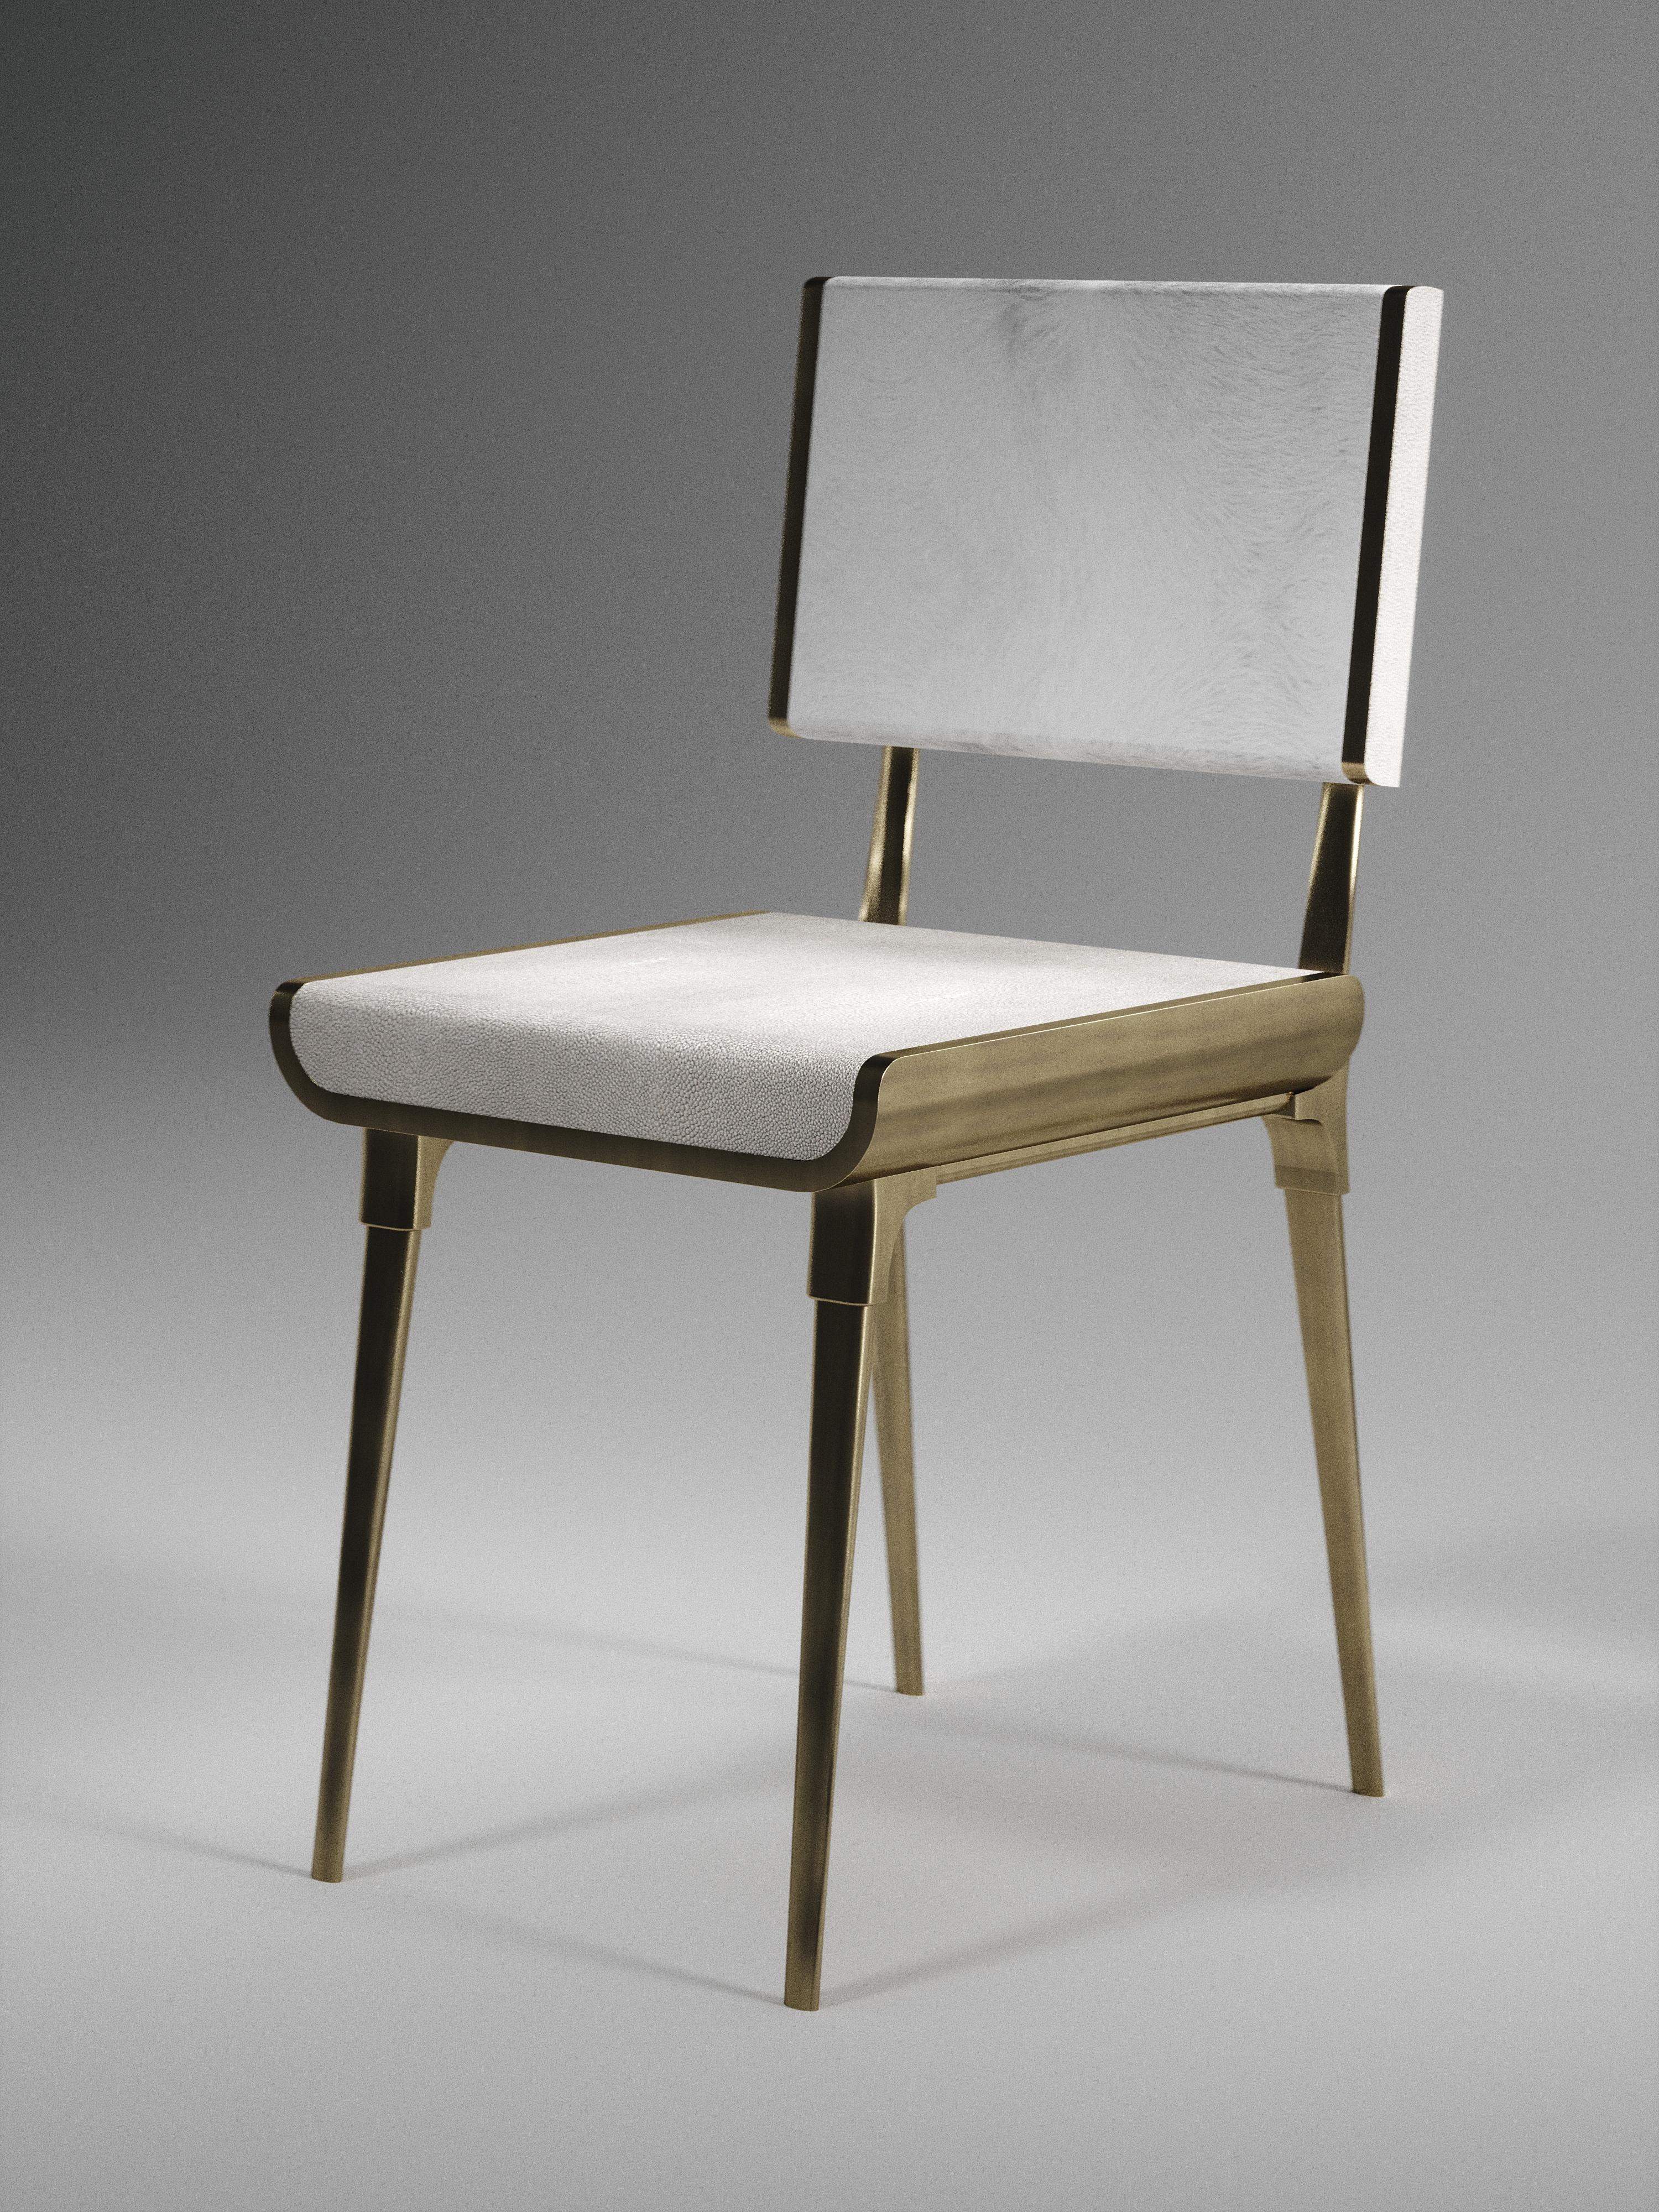 Inspired by the original Dandy bench by Kifu Paris (see images at end of slide), the Dandy II Chair is the ultimate luxury seating for a dining room or corner area. The seating area is inlaid in cream shagreen and the legs, frame and sides of the